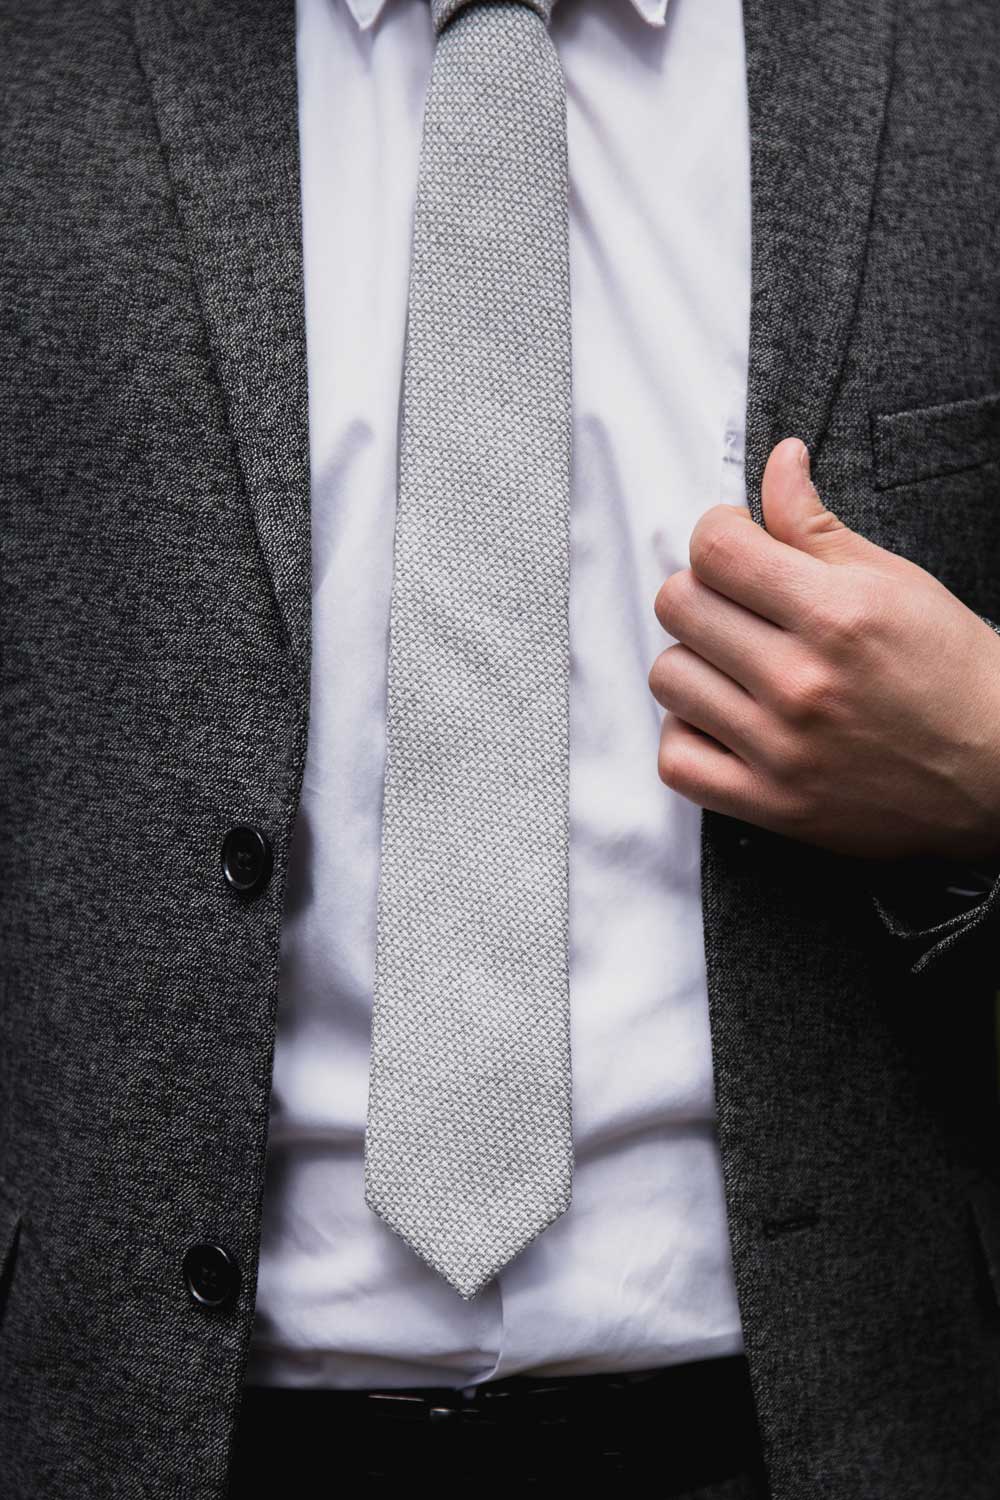 Calm tie worn with white shirt and textured charcoal gray suit jacket.